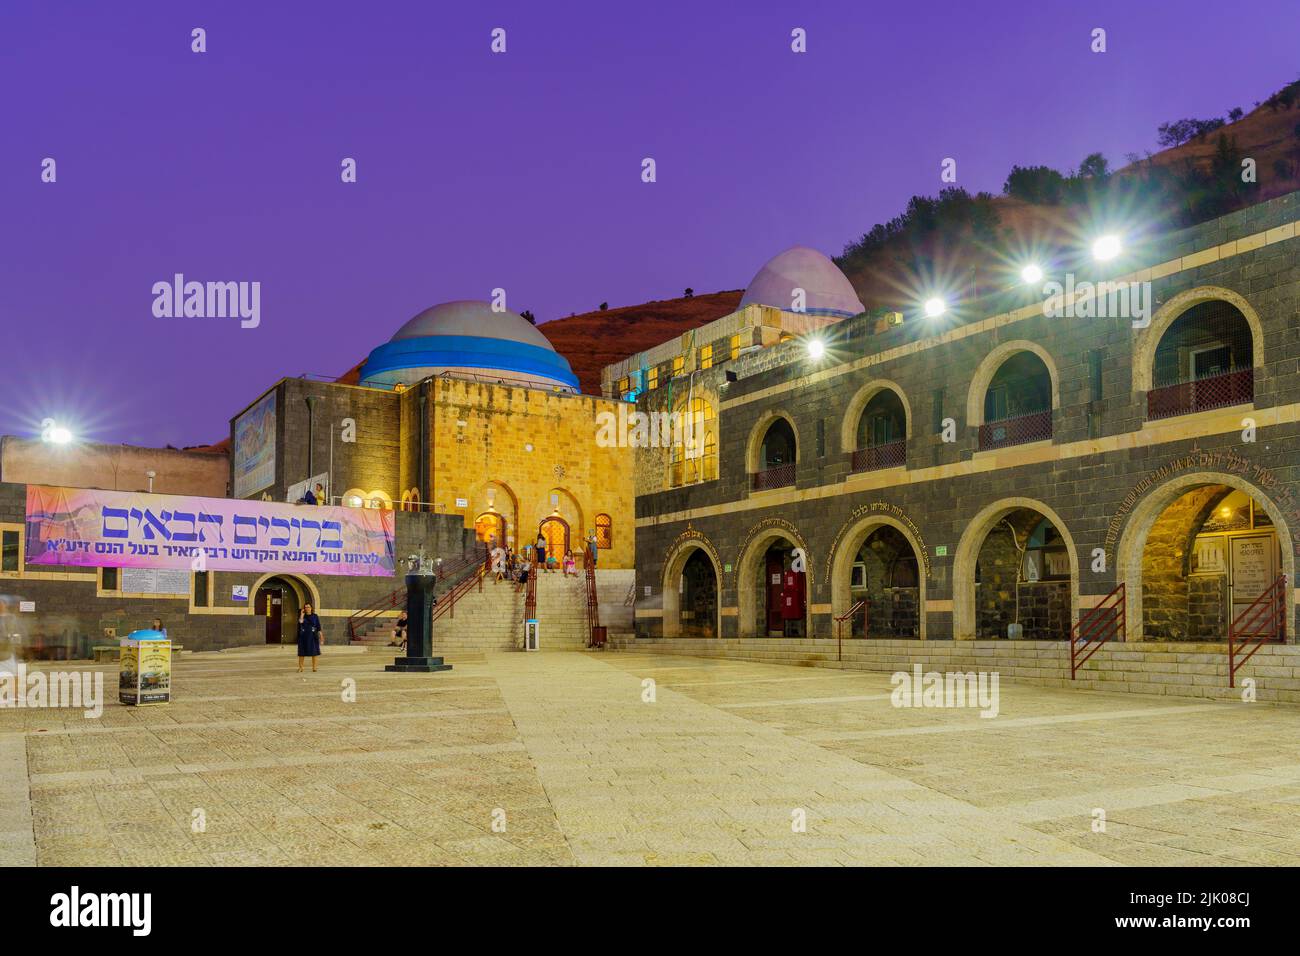 Tiberias, Israel - July 27, 2022: Evening view of the Tomb of Rabbi Meir Baal HaNes, with visitors, in Tiberias, Israel Stock Photo